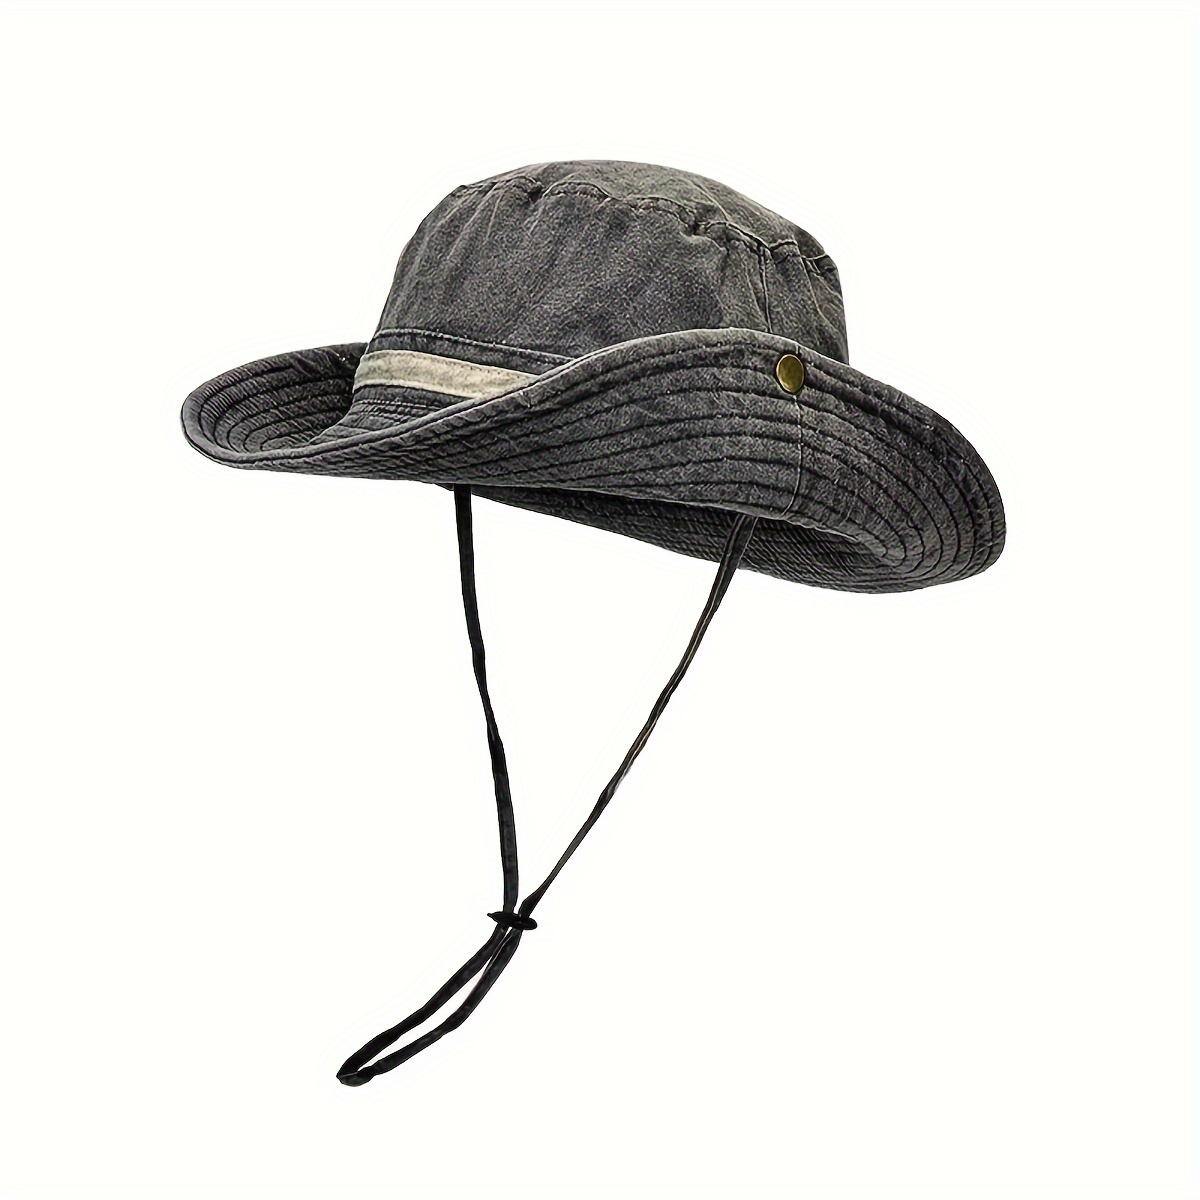 

Vintage Washed Bucket Hat Casual Cotton Fishermen Hats Outdoor Sun Protection Hats Women For Spring And Summer